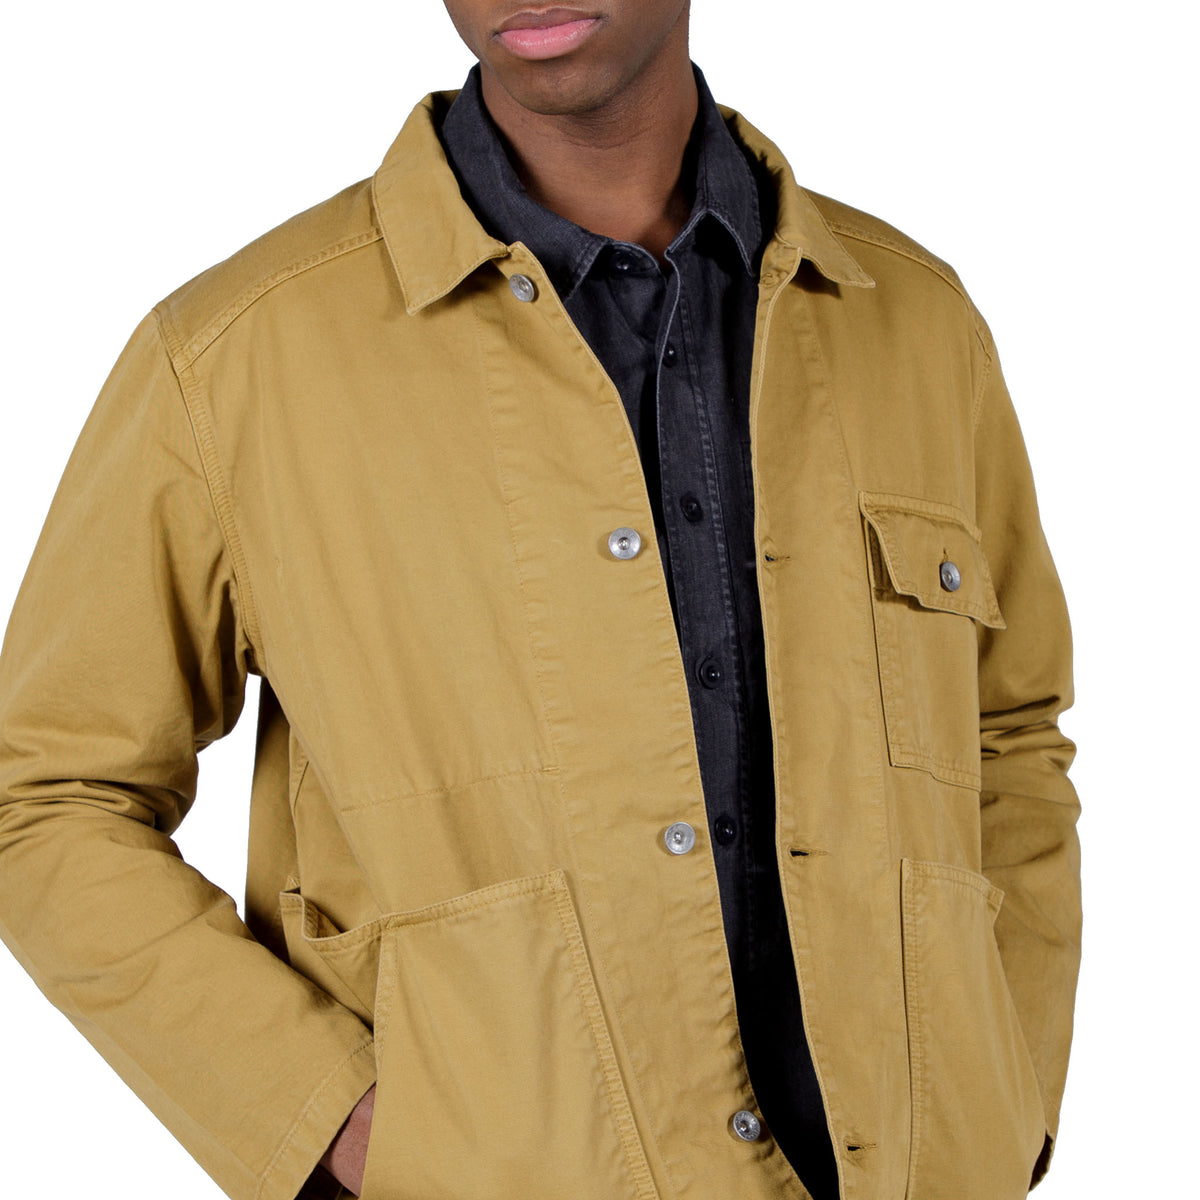 Albam GD Twill Carpenters Jacket in Tobacco - Wallace Mercantile Shop